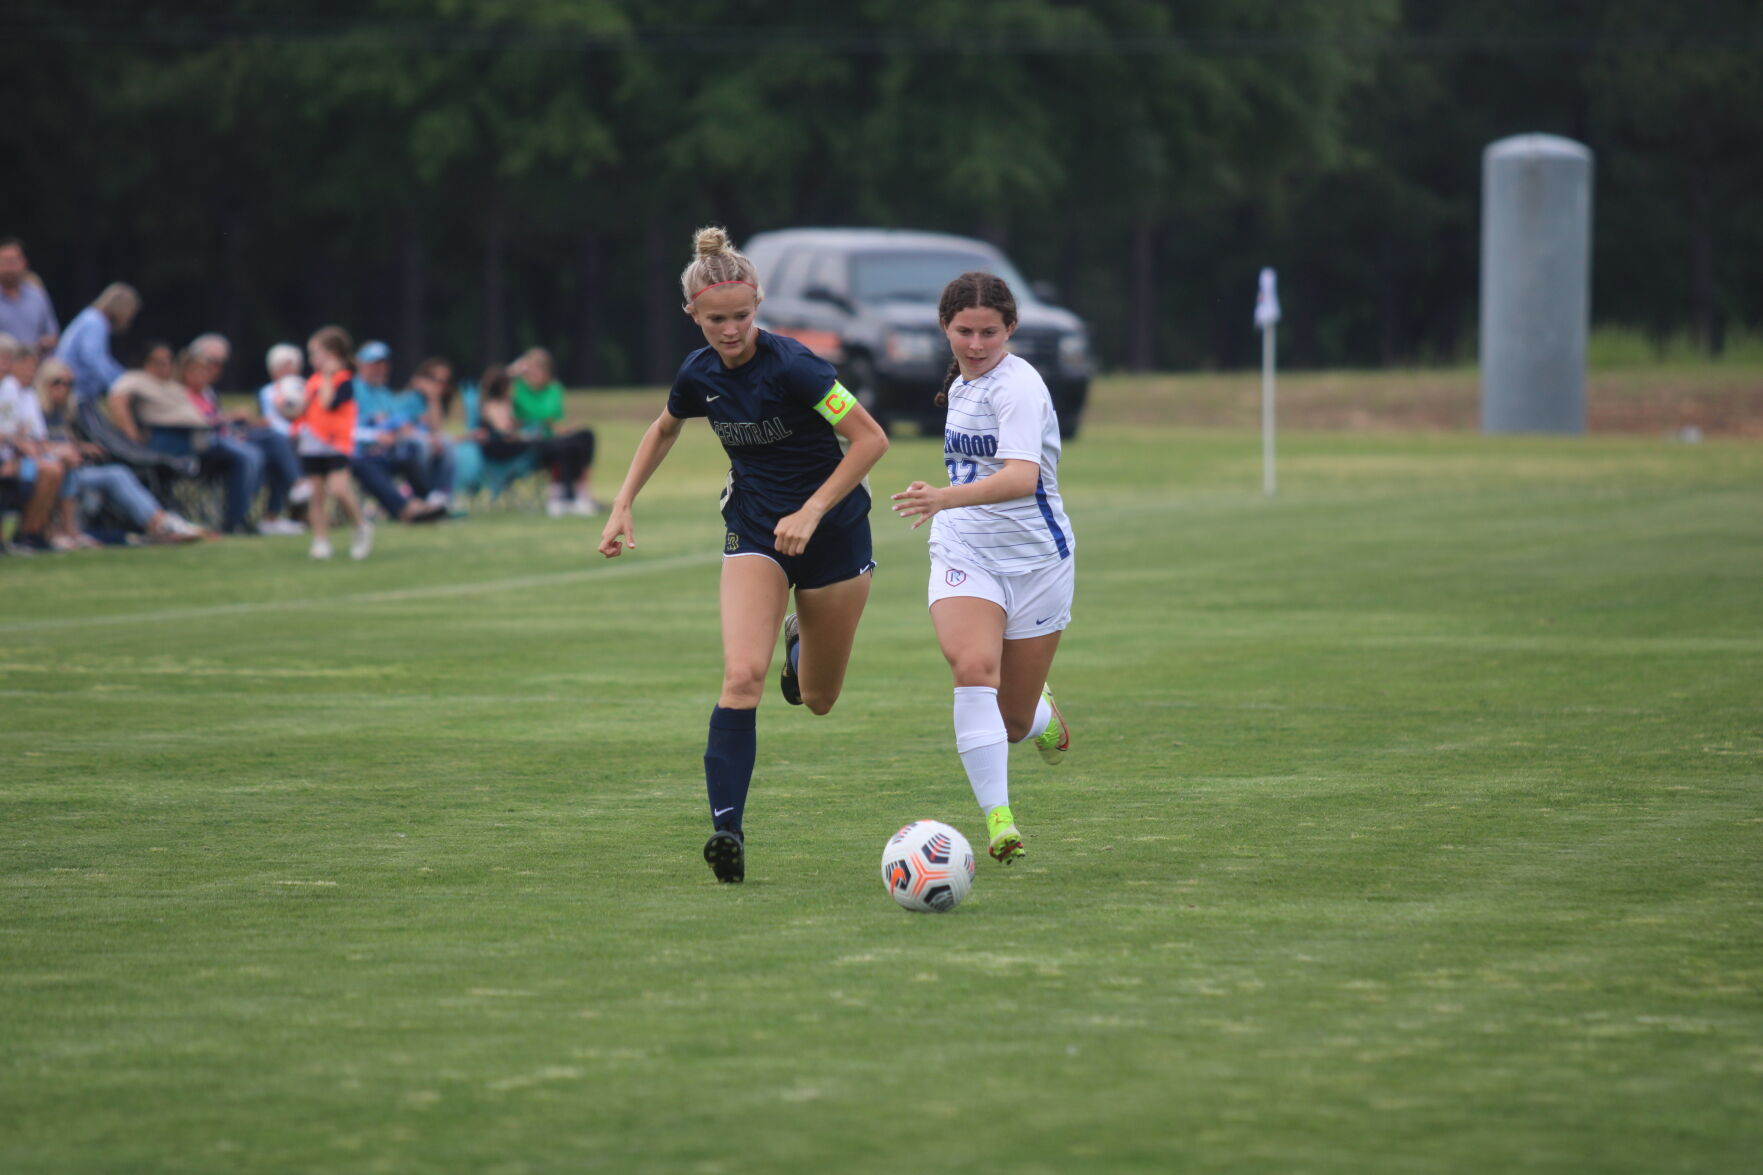 Riverwood stuns Thomas County Central Lady Jackets in playoff upset with 2-0 victory